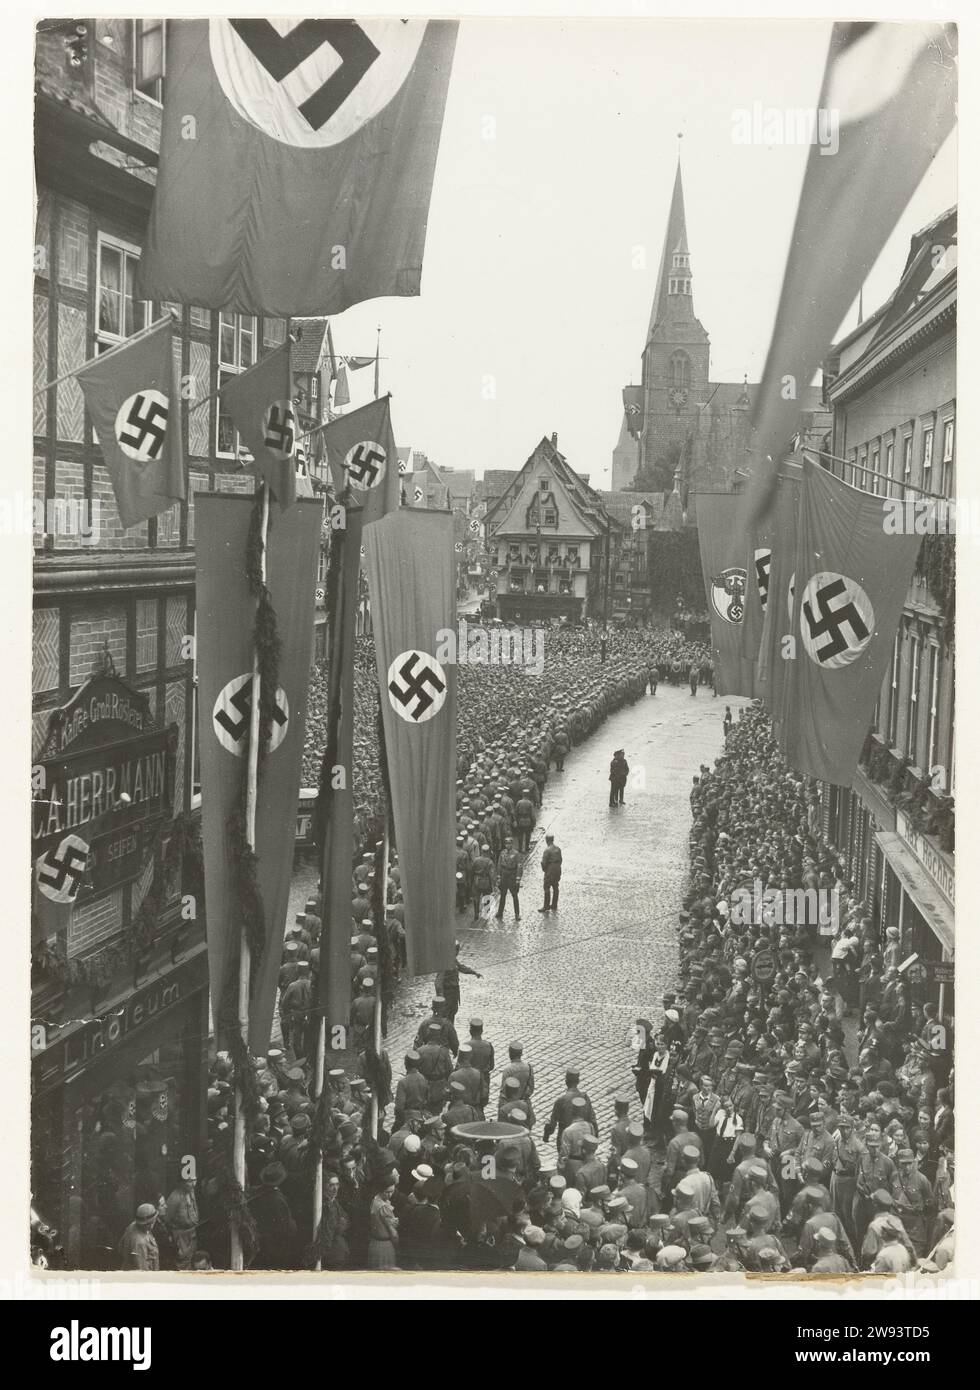 Celebration of the Thousandth Anniversary of the German Reich, 1936 photograph At the Quedlinburg market, the fact is celebrated that King Heinrich I died 1000 years ago. He was seen as the founder of the German Empire. Reichsführer der SS Heinrich Himmler set up in the church where Heinrich I is funes in an 'ss Weihestätte'. The church can be seen in the background. There are flags with the Swastika of the houses on the left and right. Quedlinburg photographic support gelatin silver print  Quedlinburg Stock Photo